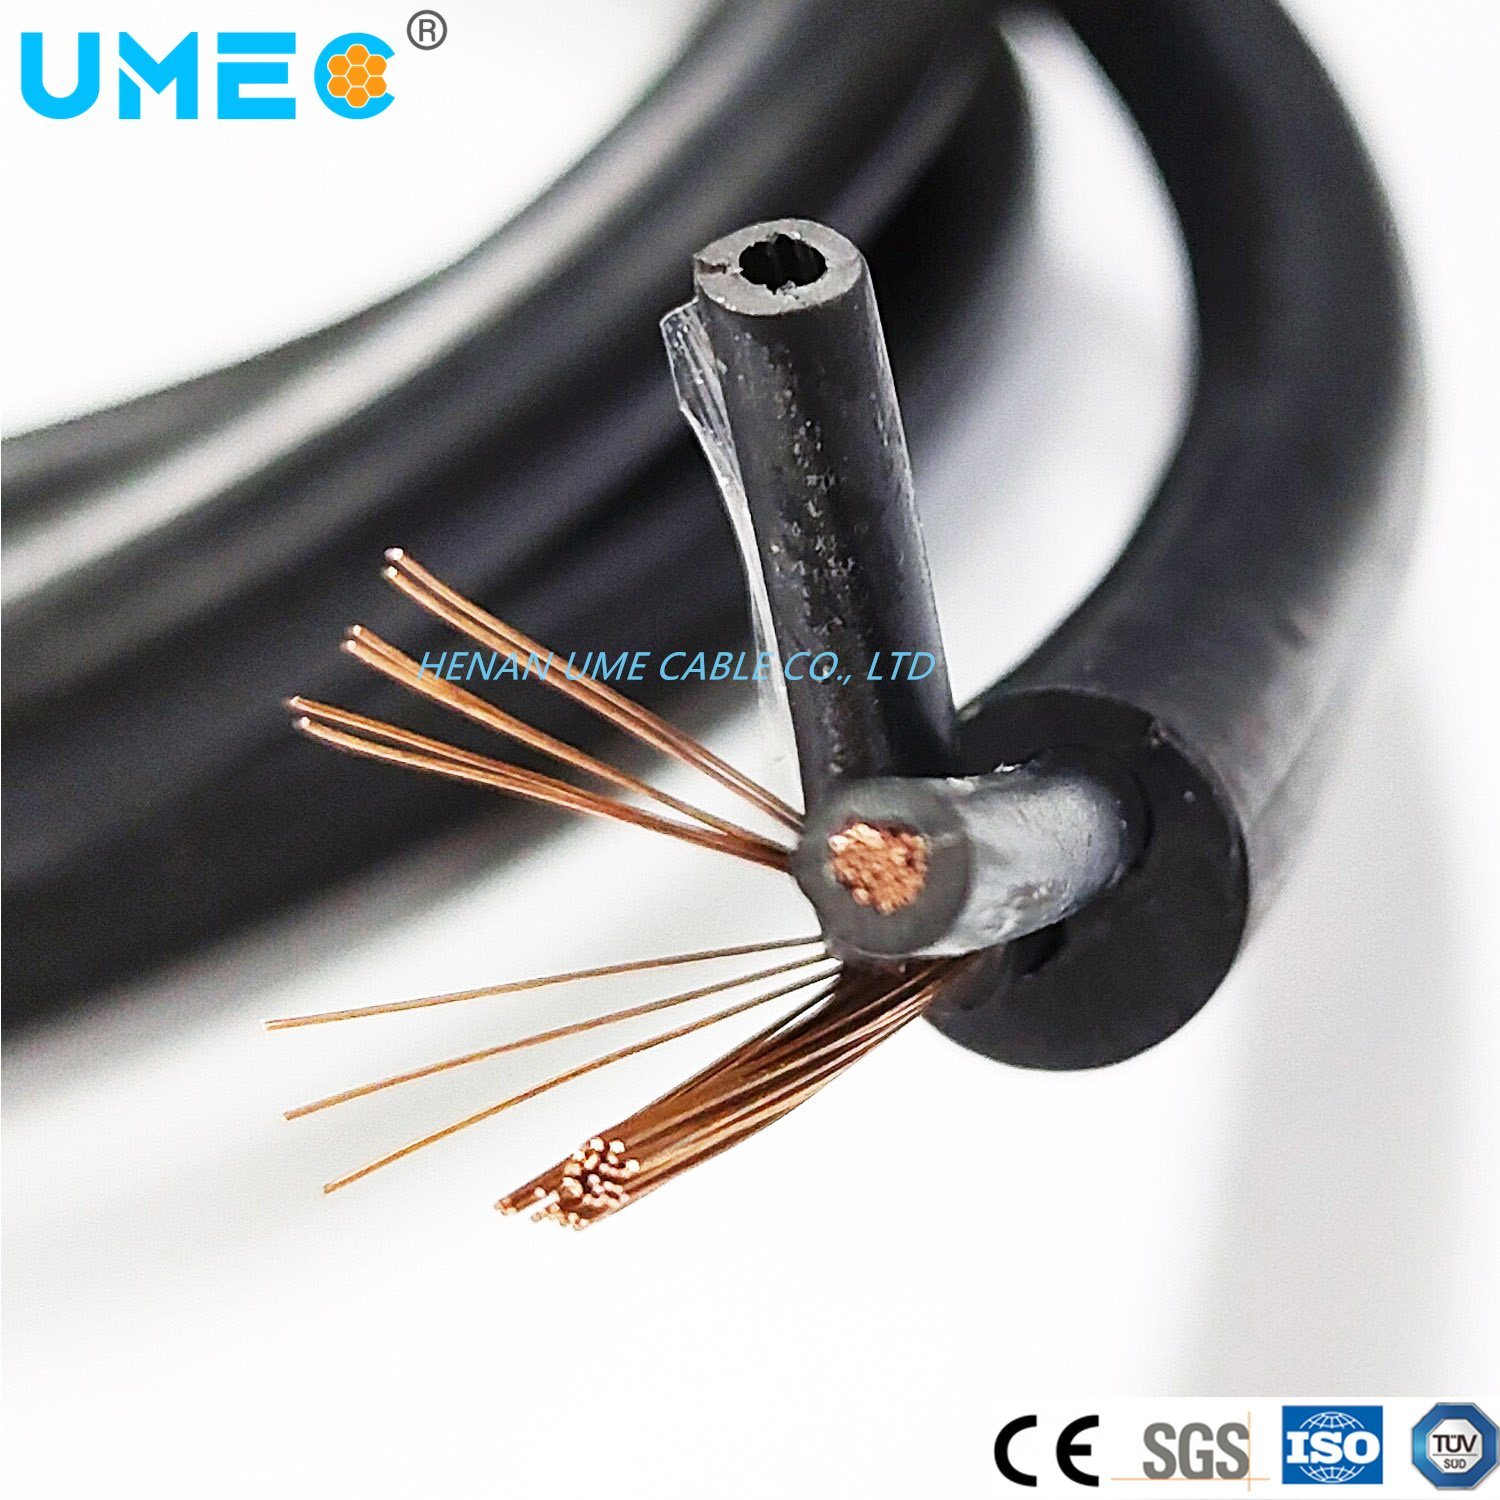 European CPE/Epr/EPDM/Neoprene H05bb (RN) -F H07bb (RN) -F 2 3 4 5core Electric Rubber Cable for Install